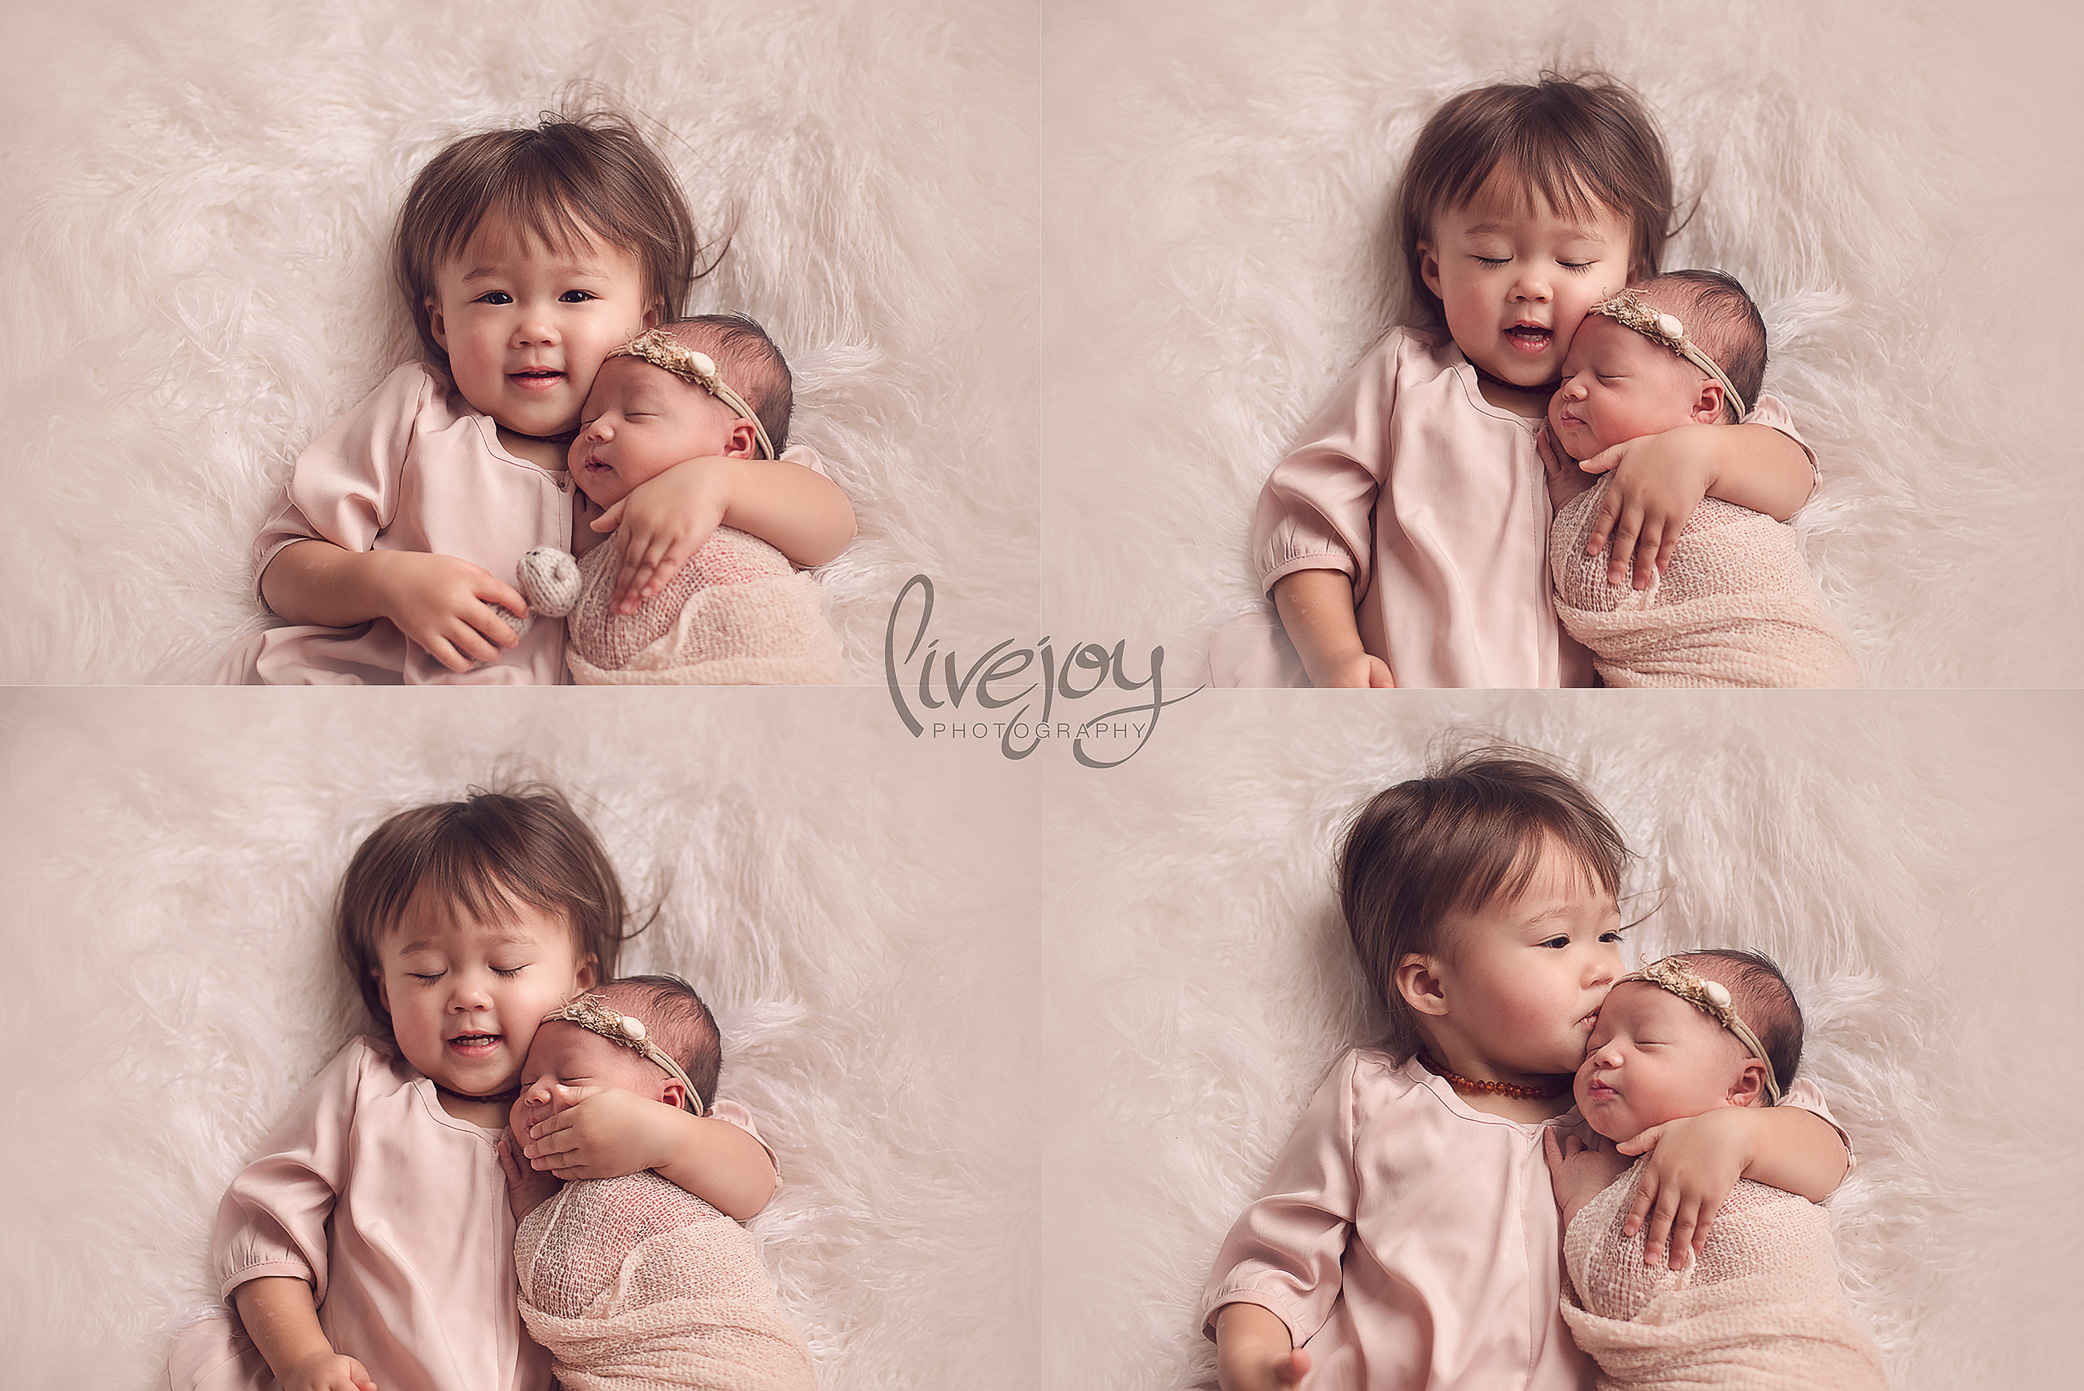 Newborn Photography with Siblings | LiveJoy Photography